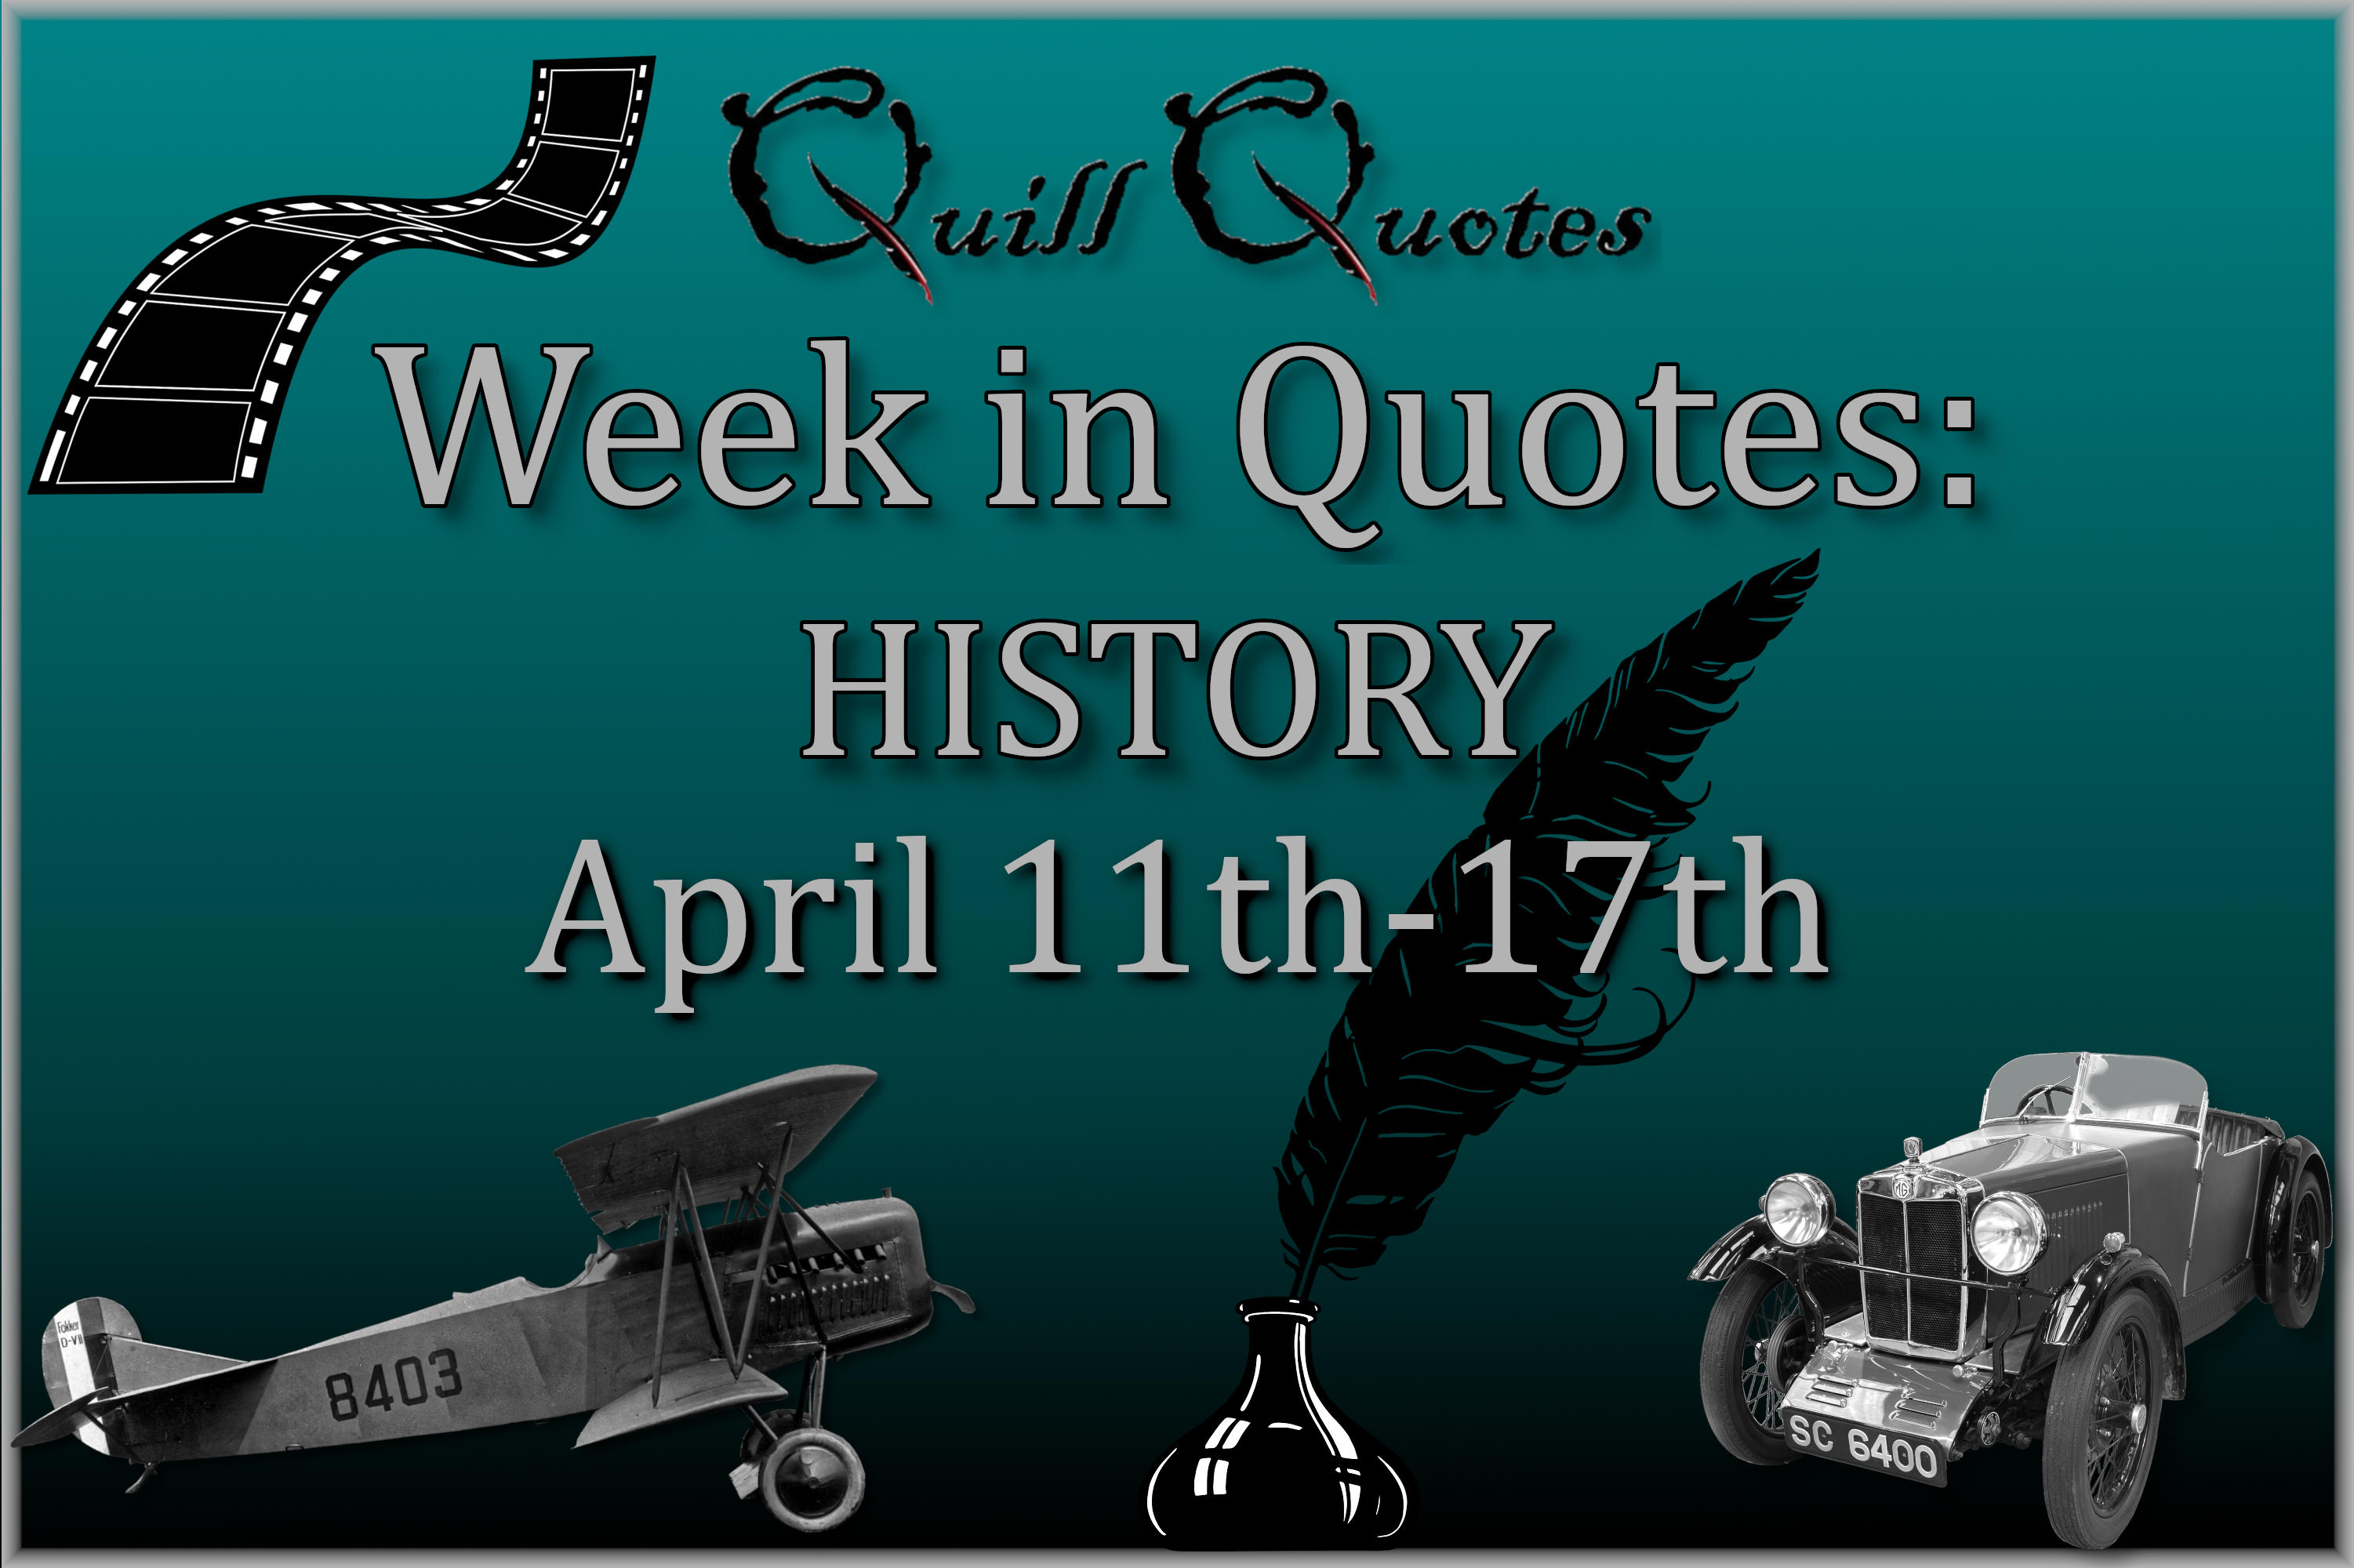 Week in Quotes: HISTORY April 11th-17th